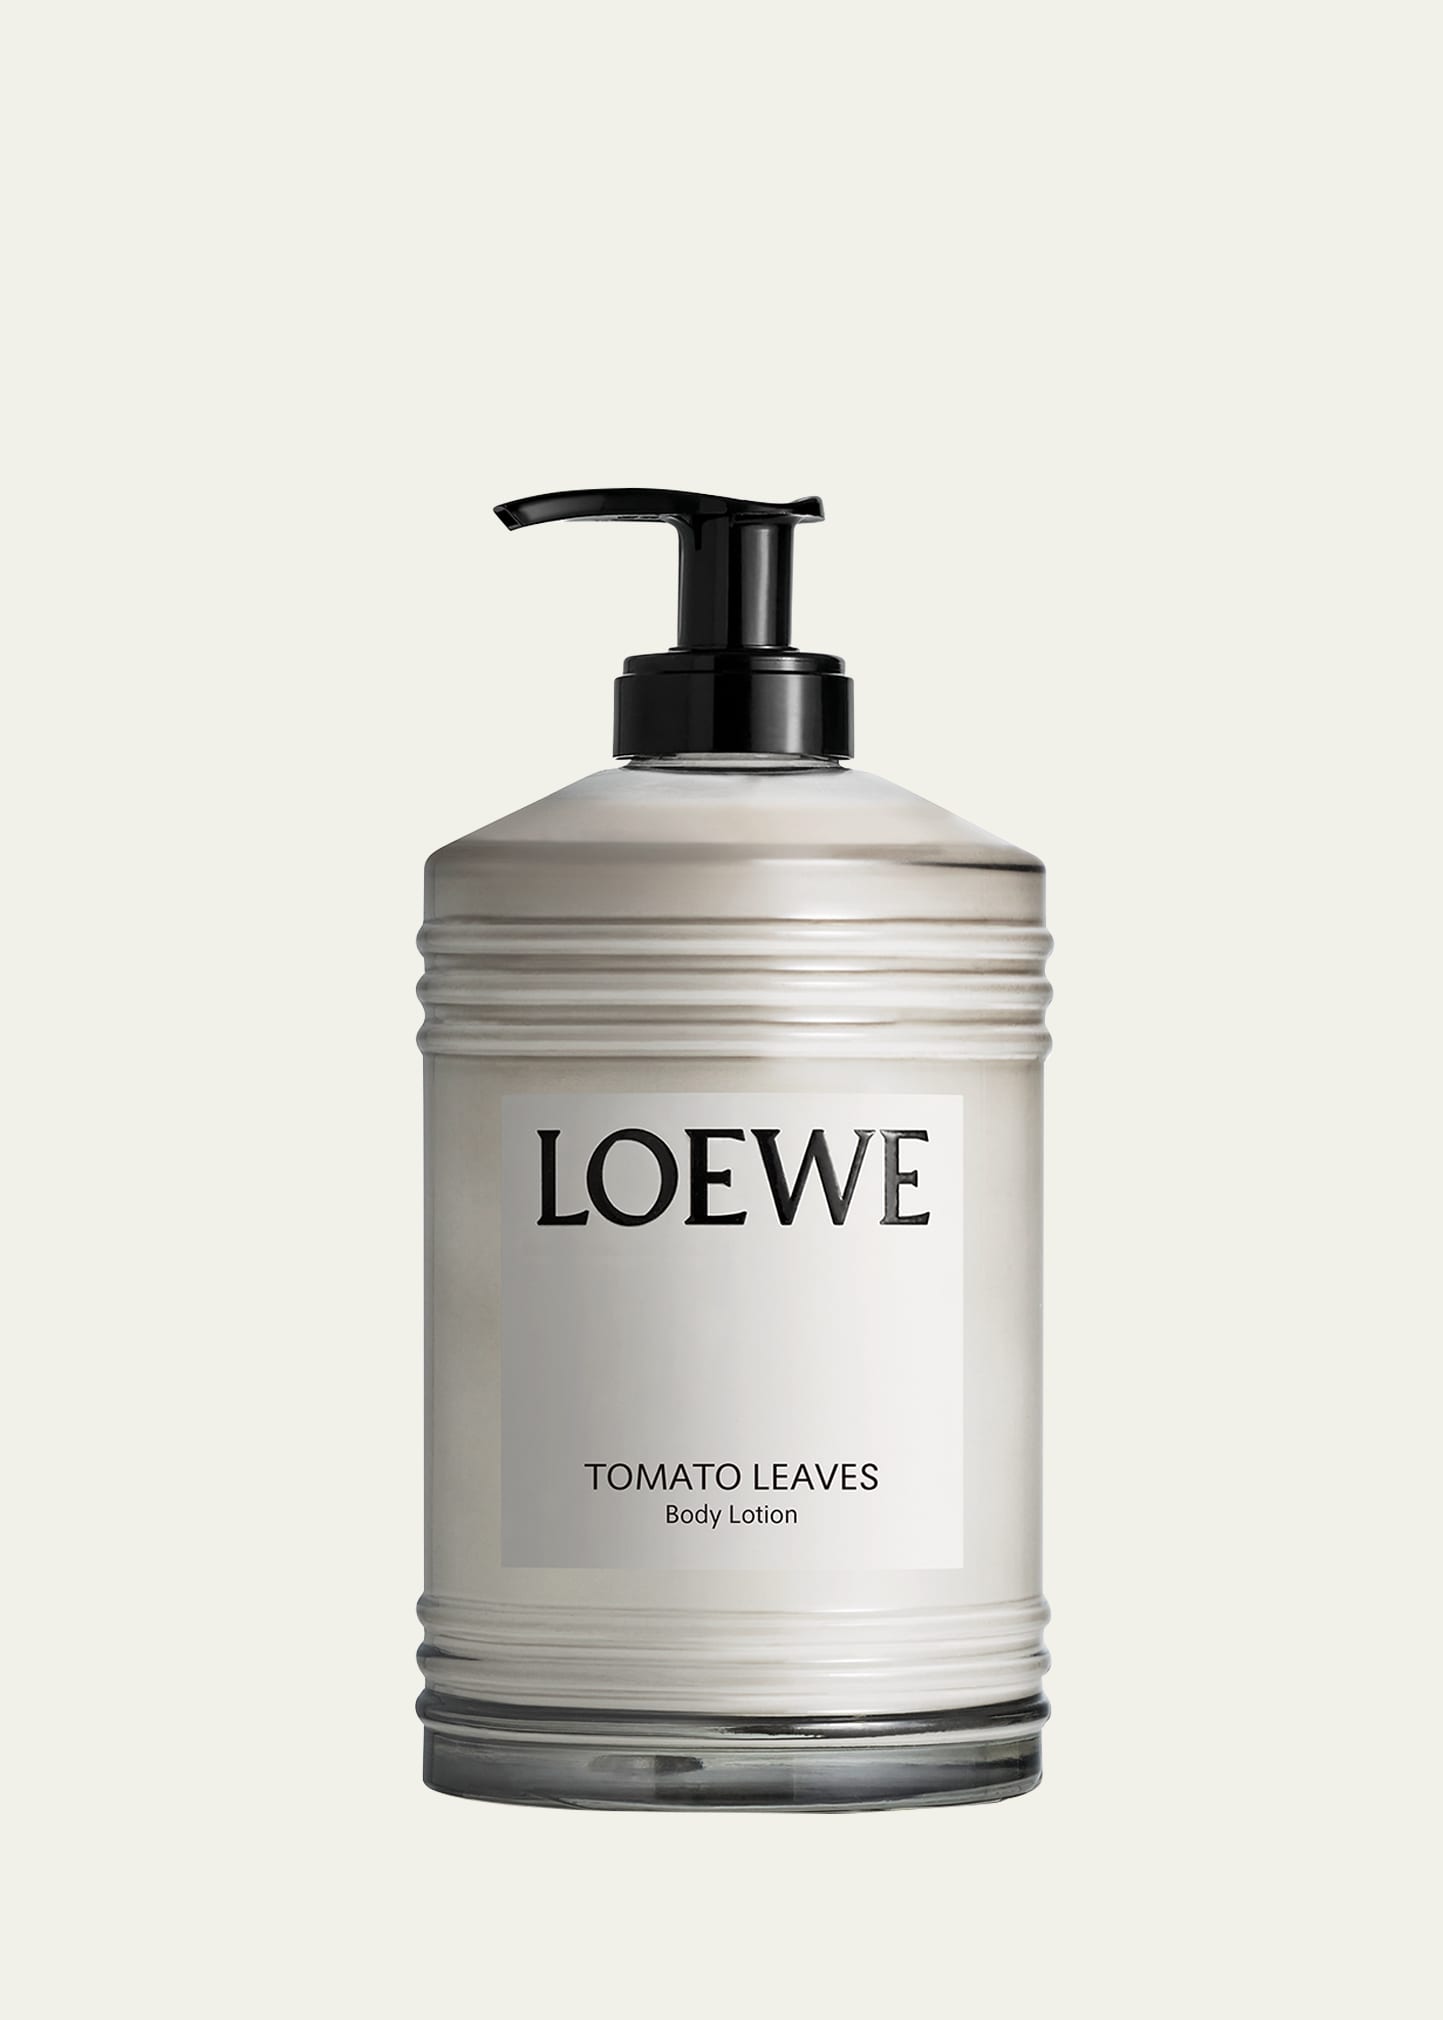 Loewe Tomato Leaves Body Lotion, 12 Oz. In White